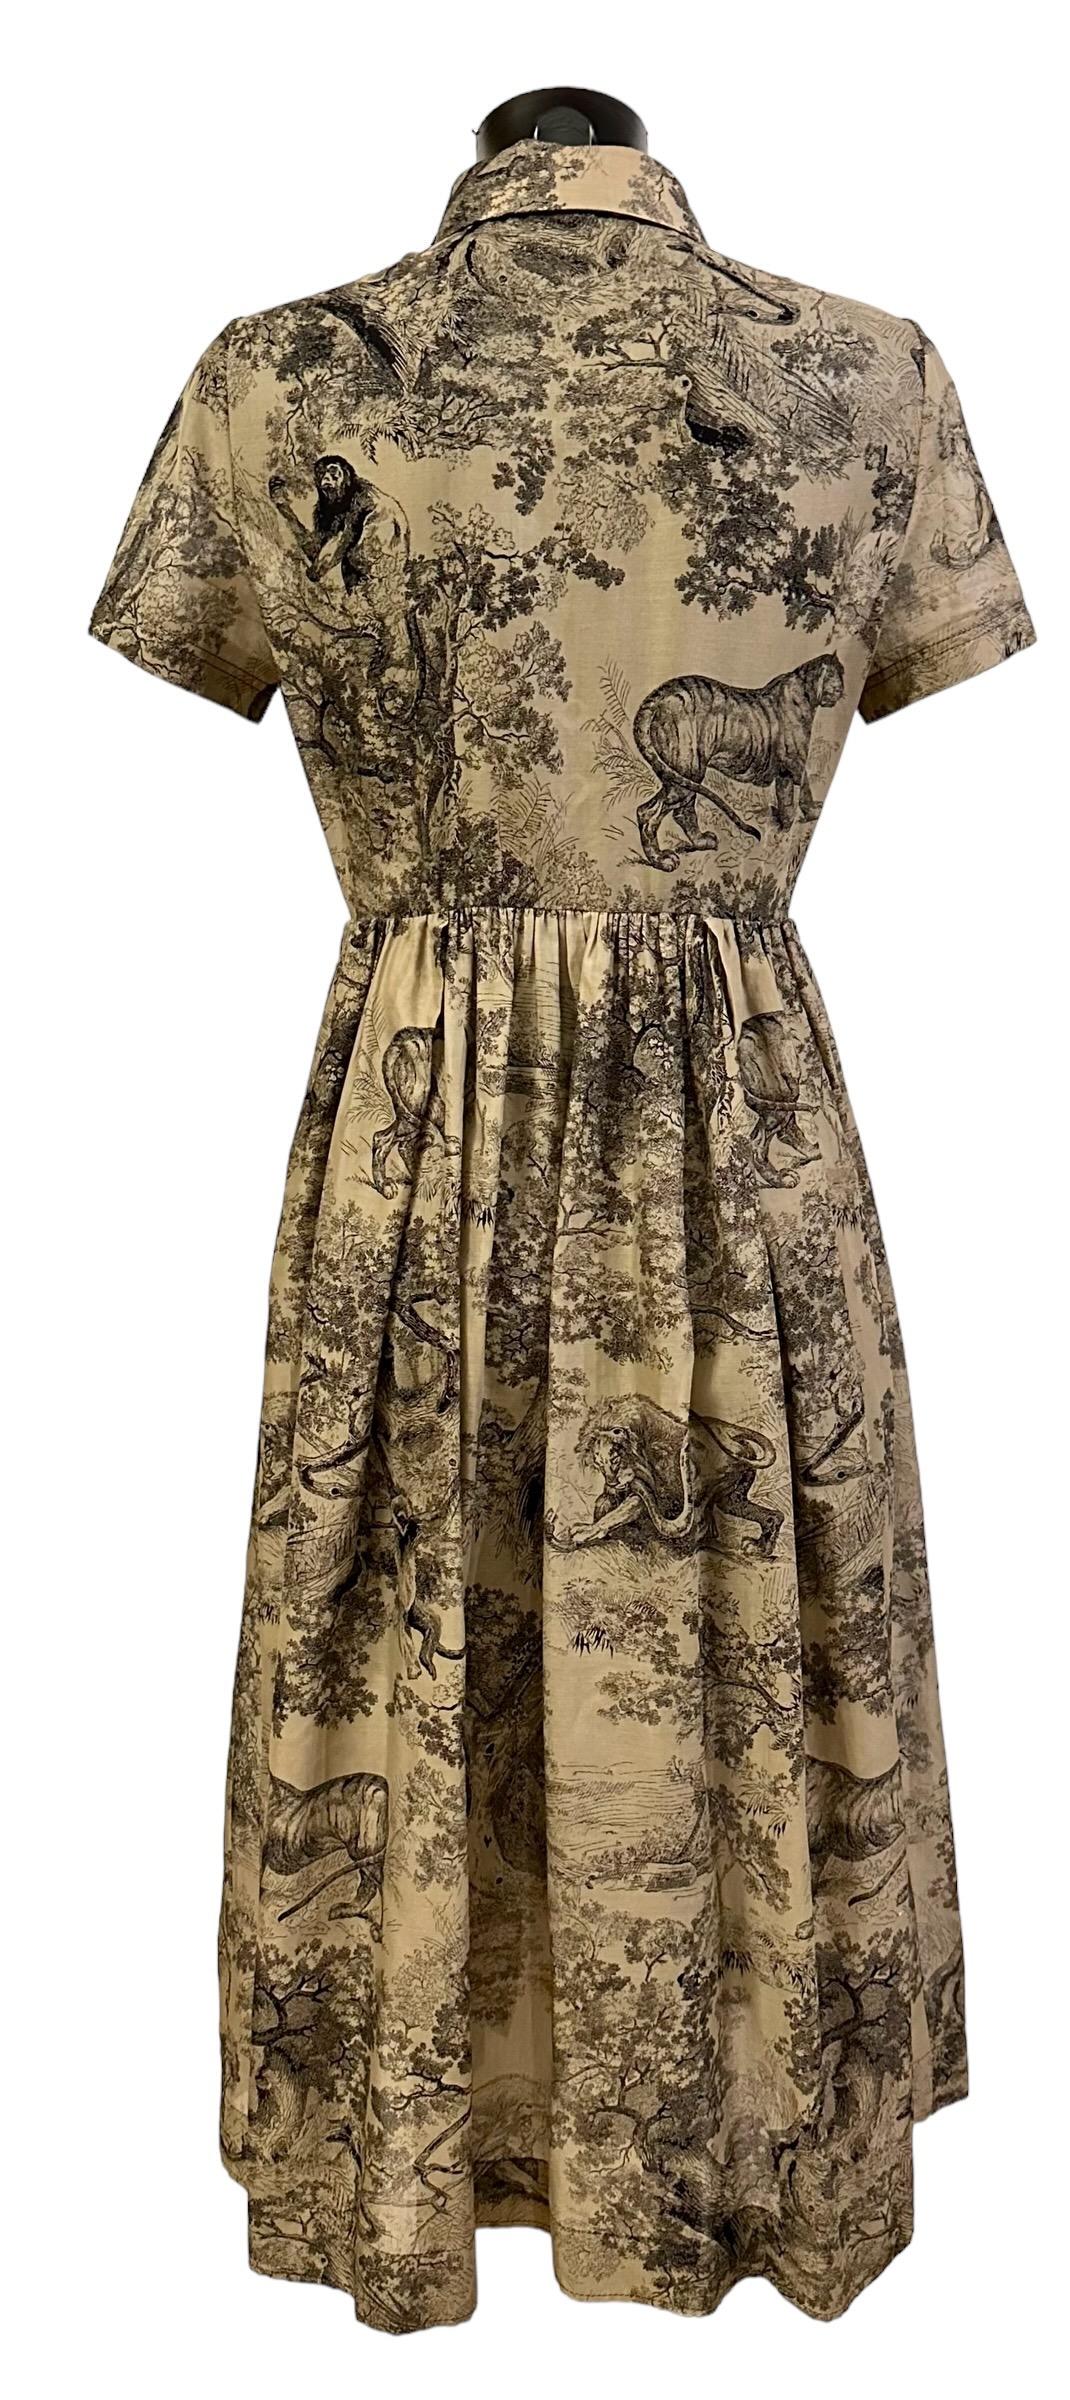 This pre-owned shirt dress showcases the House's hallmark Toile de Jouy motif in black and beige. 
Craftted in cotton voile, it boasts a long and fluid silhouette enhanced by a spread collar, pleated details at the waist and short